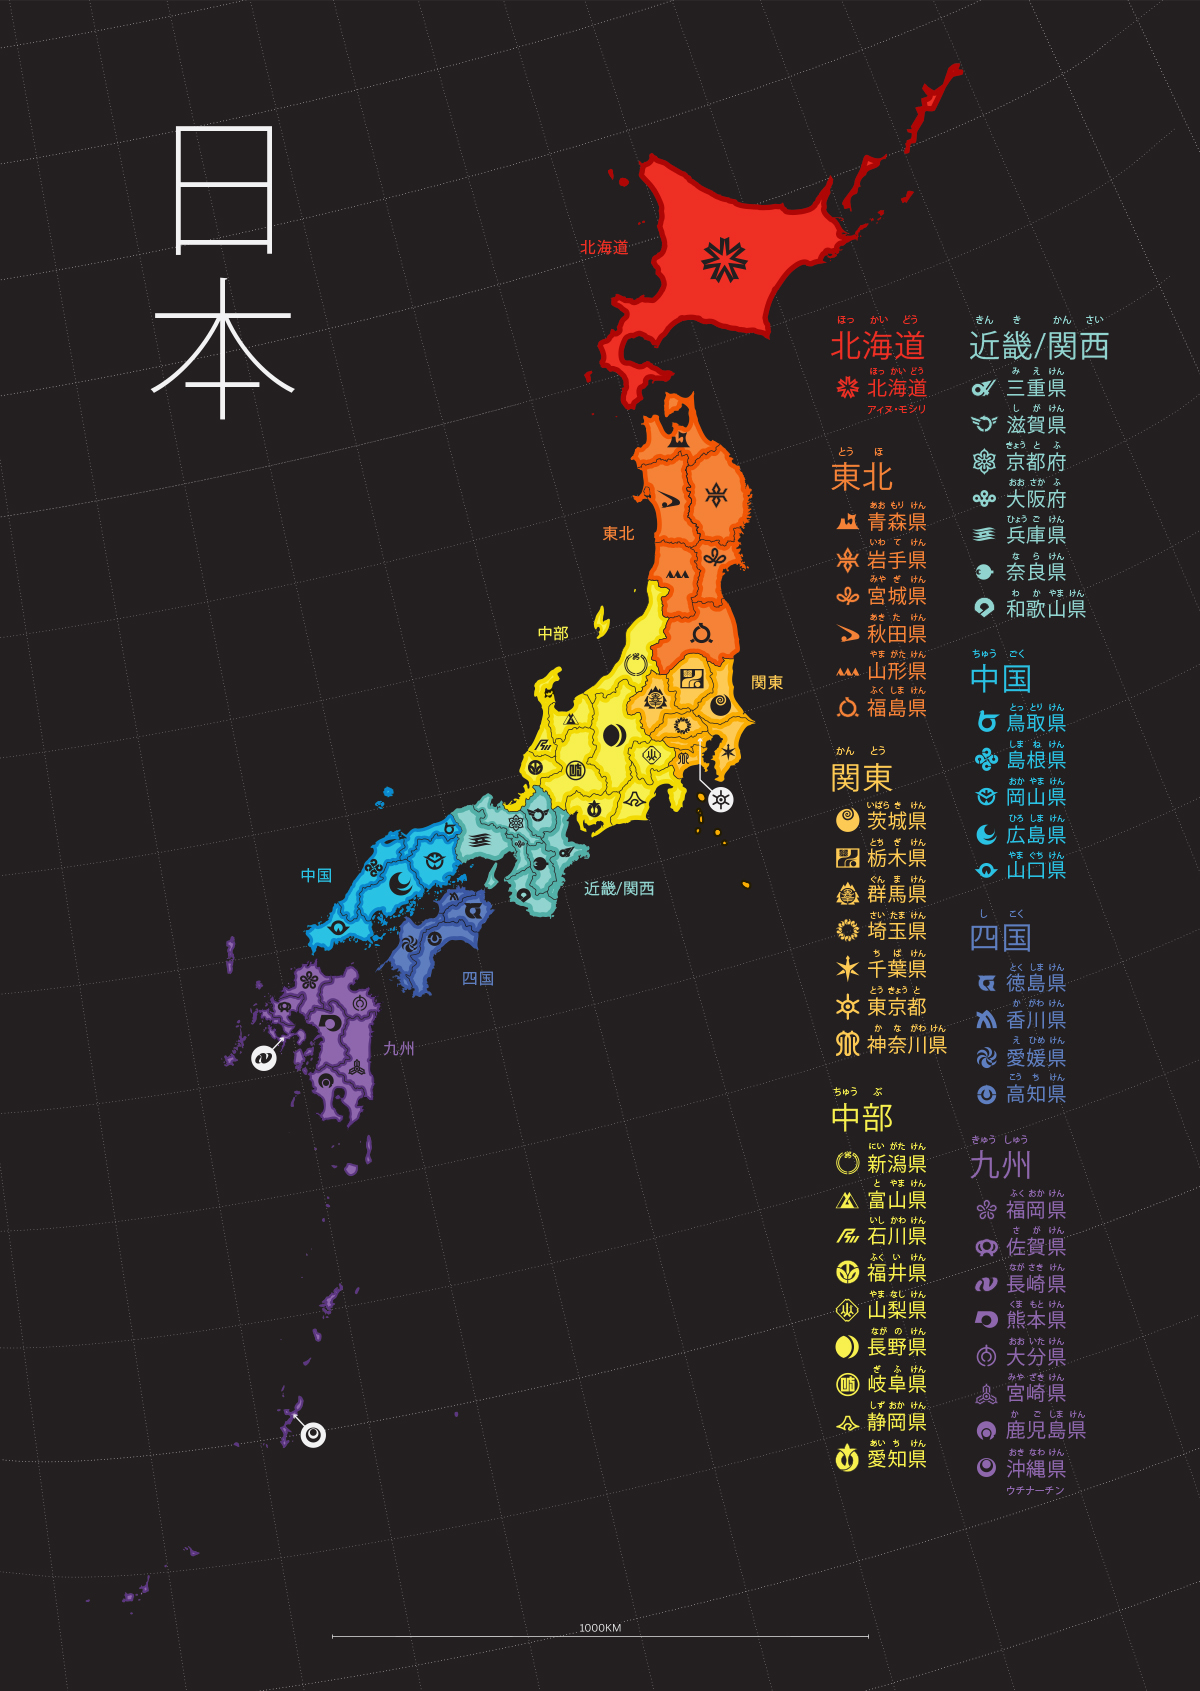 A colorful map of Japan on a black background. Each region is in a different color of the rainbow from top to bottom.